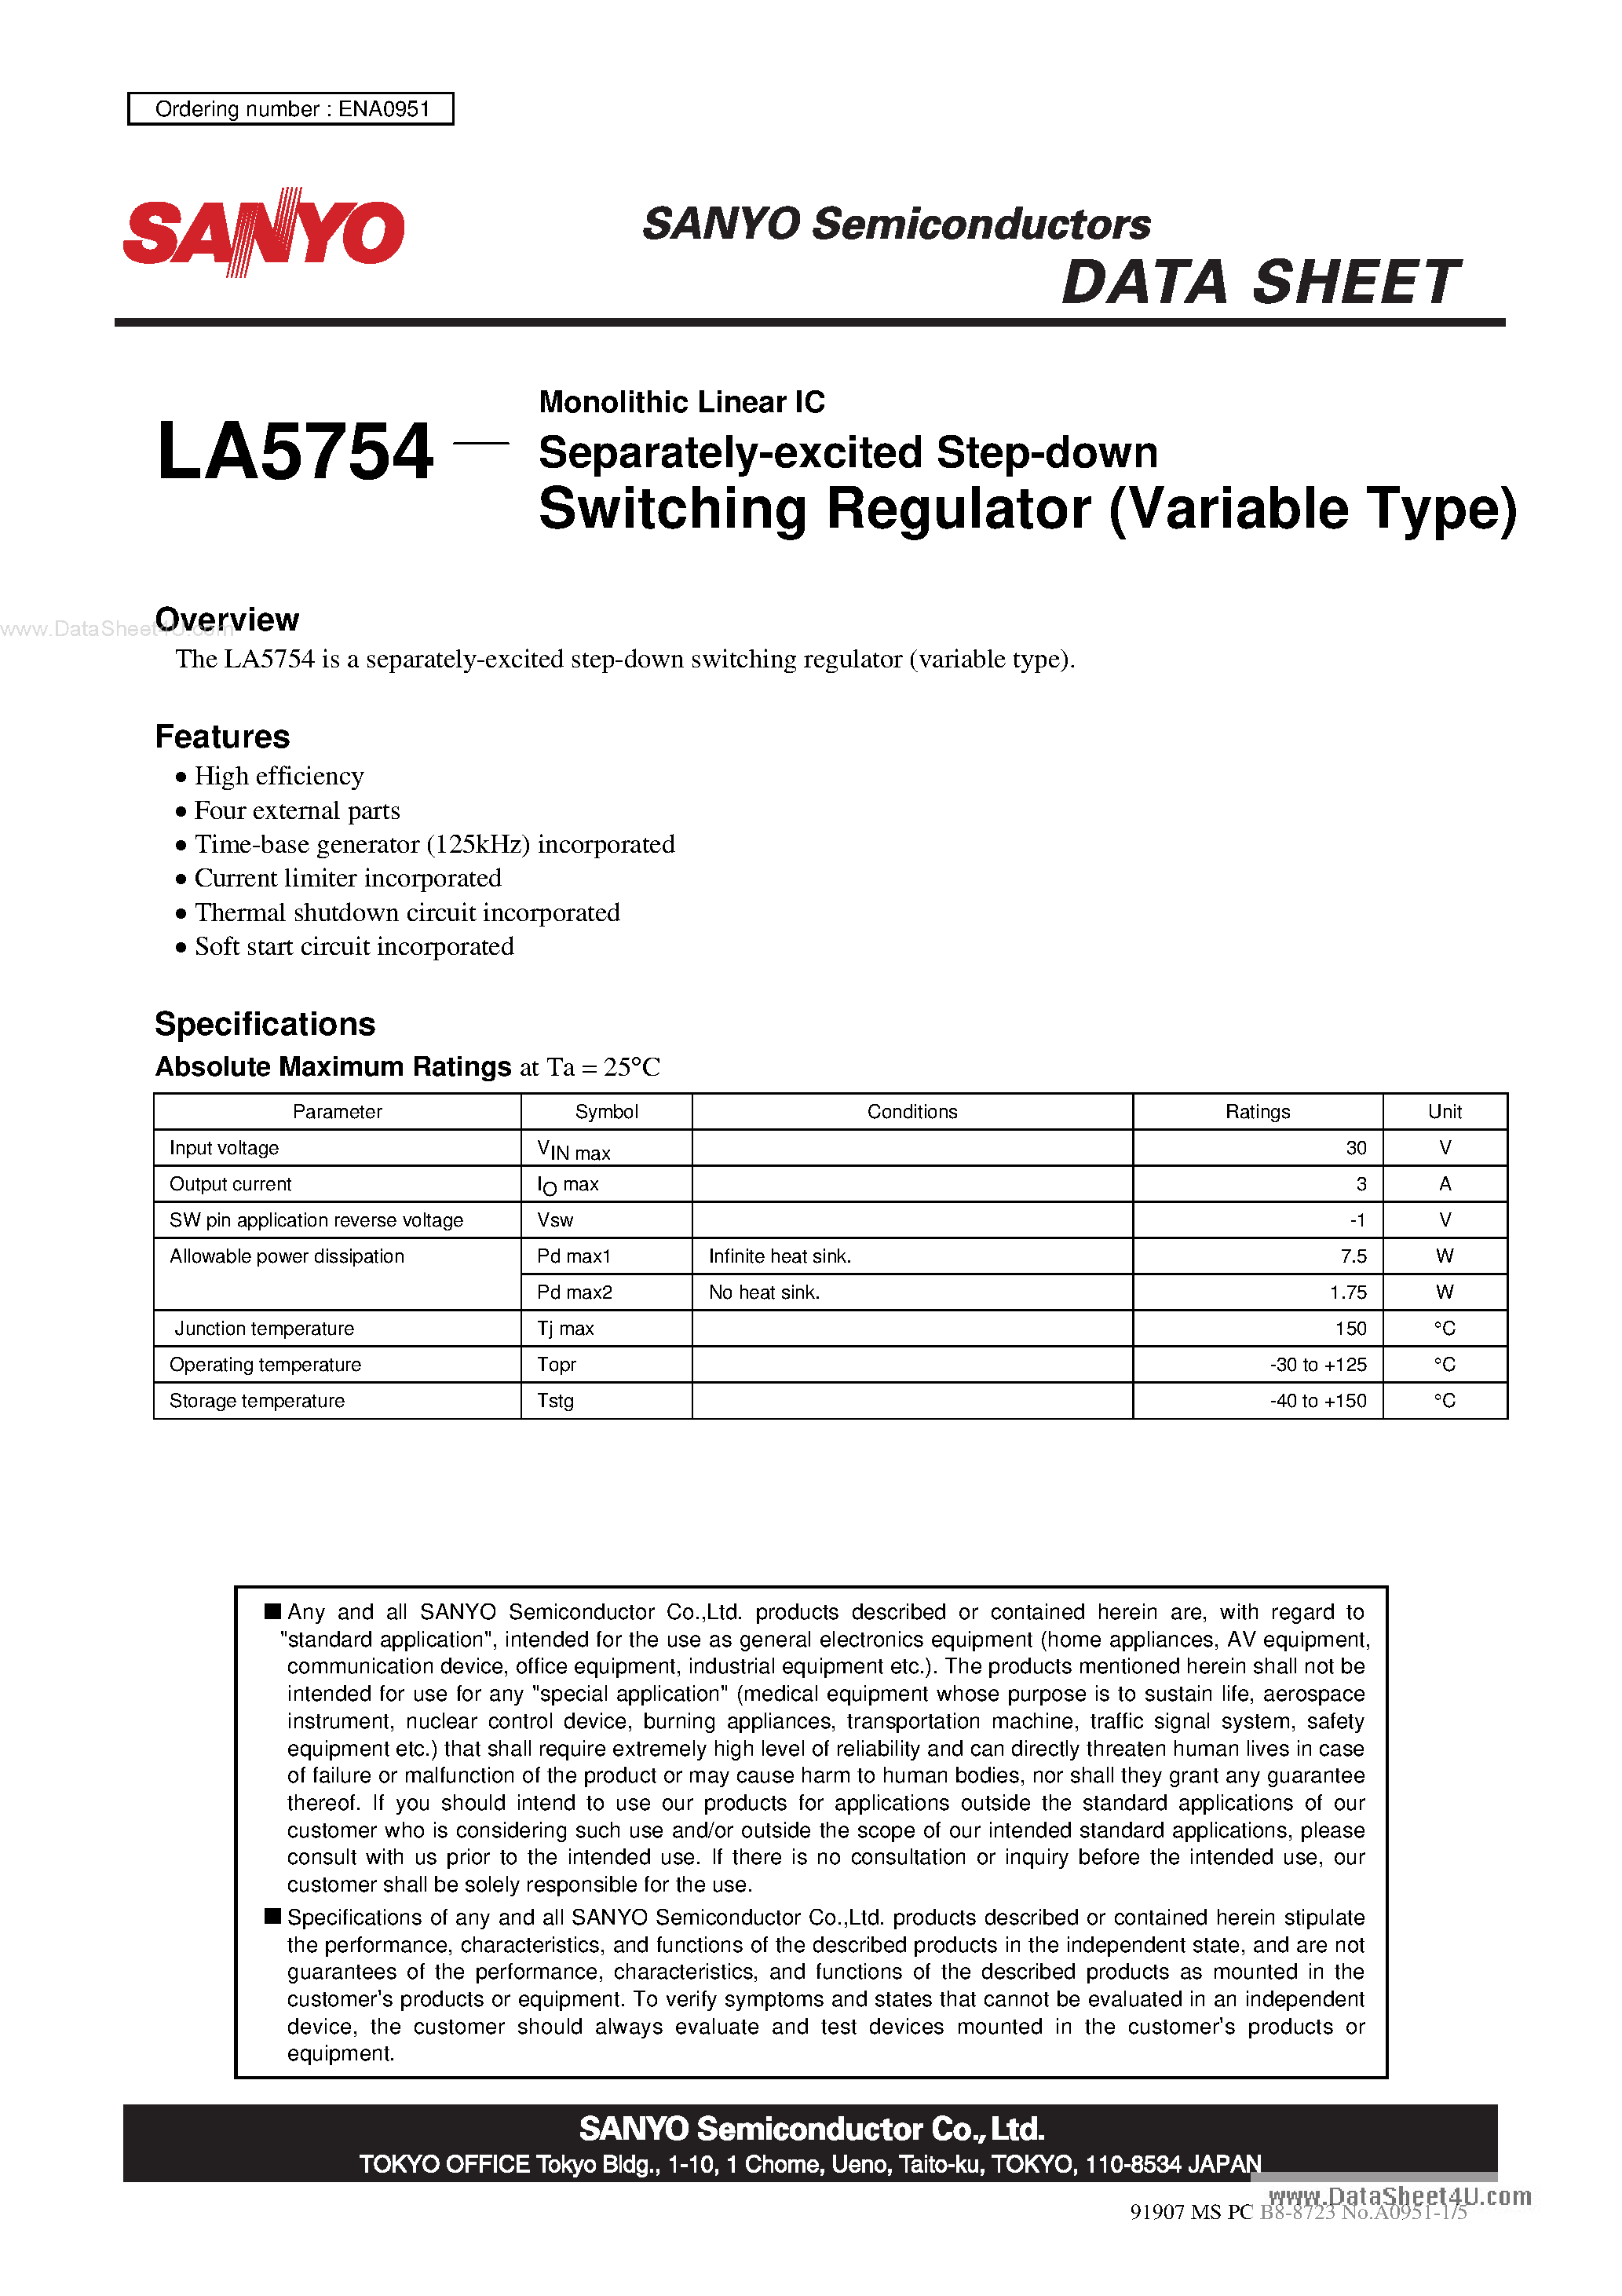 Даташит LA5754 - Monolithic Linear IC Separately-Excited Step-Down Switching Regulator страница 1